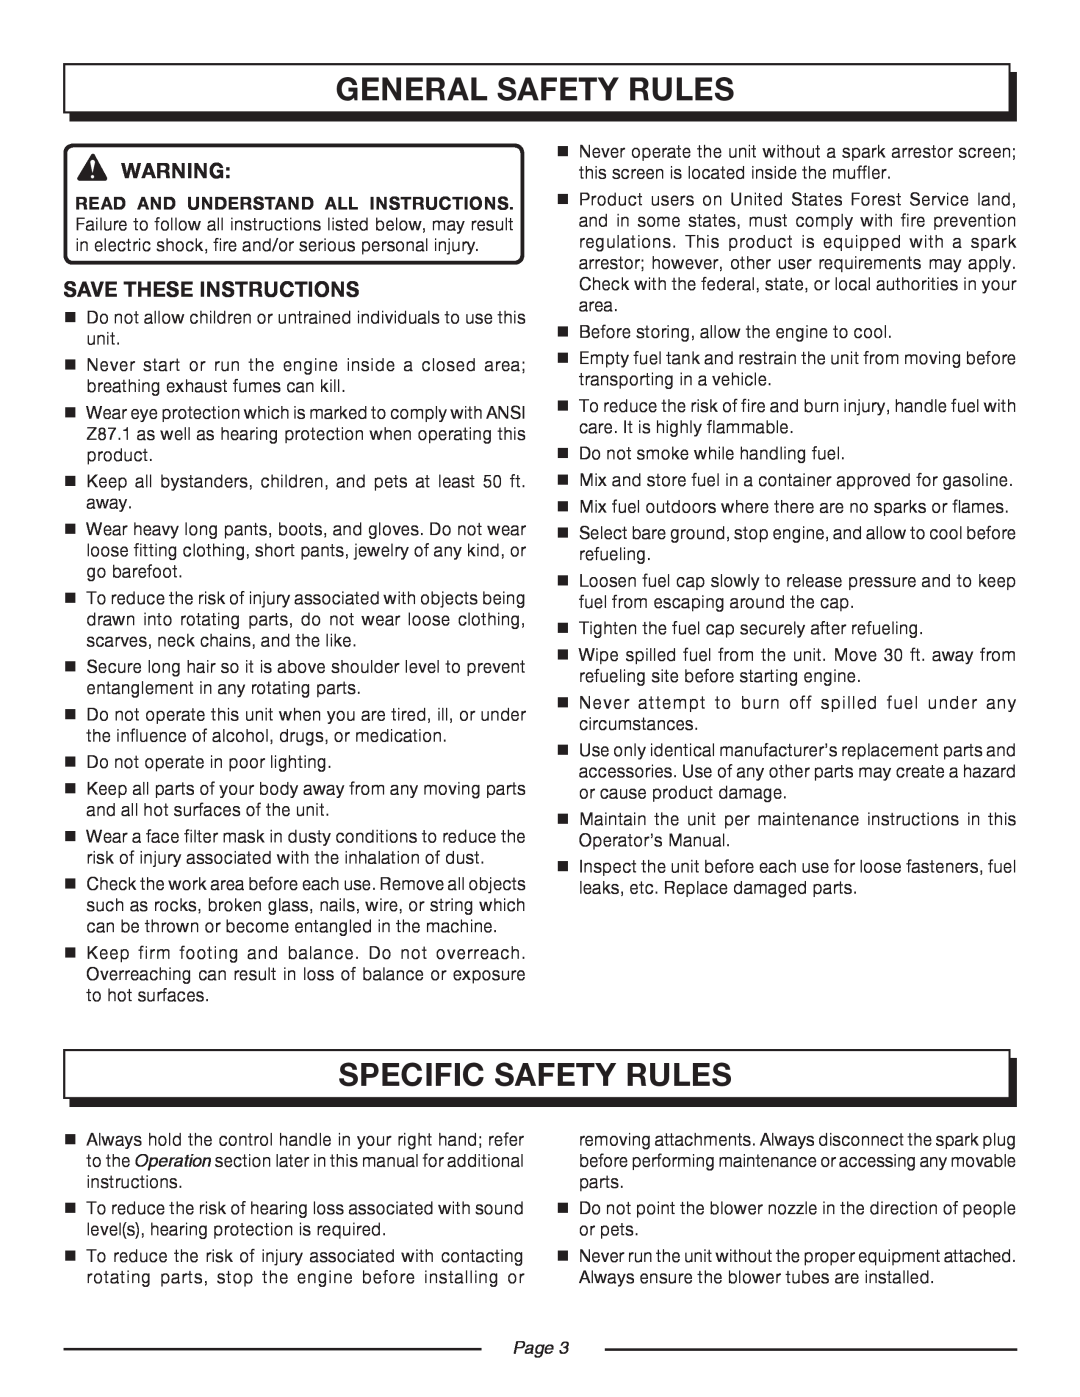 Homelite UT08520 manual general safety rules, specific safety rules, Save These Instructions, Page  